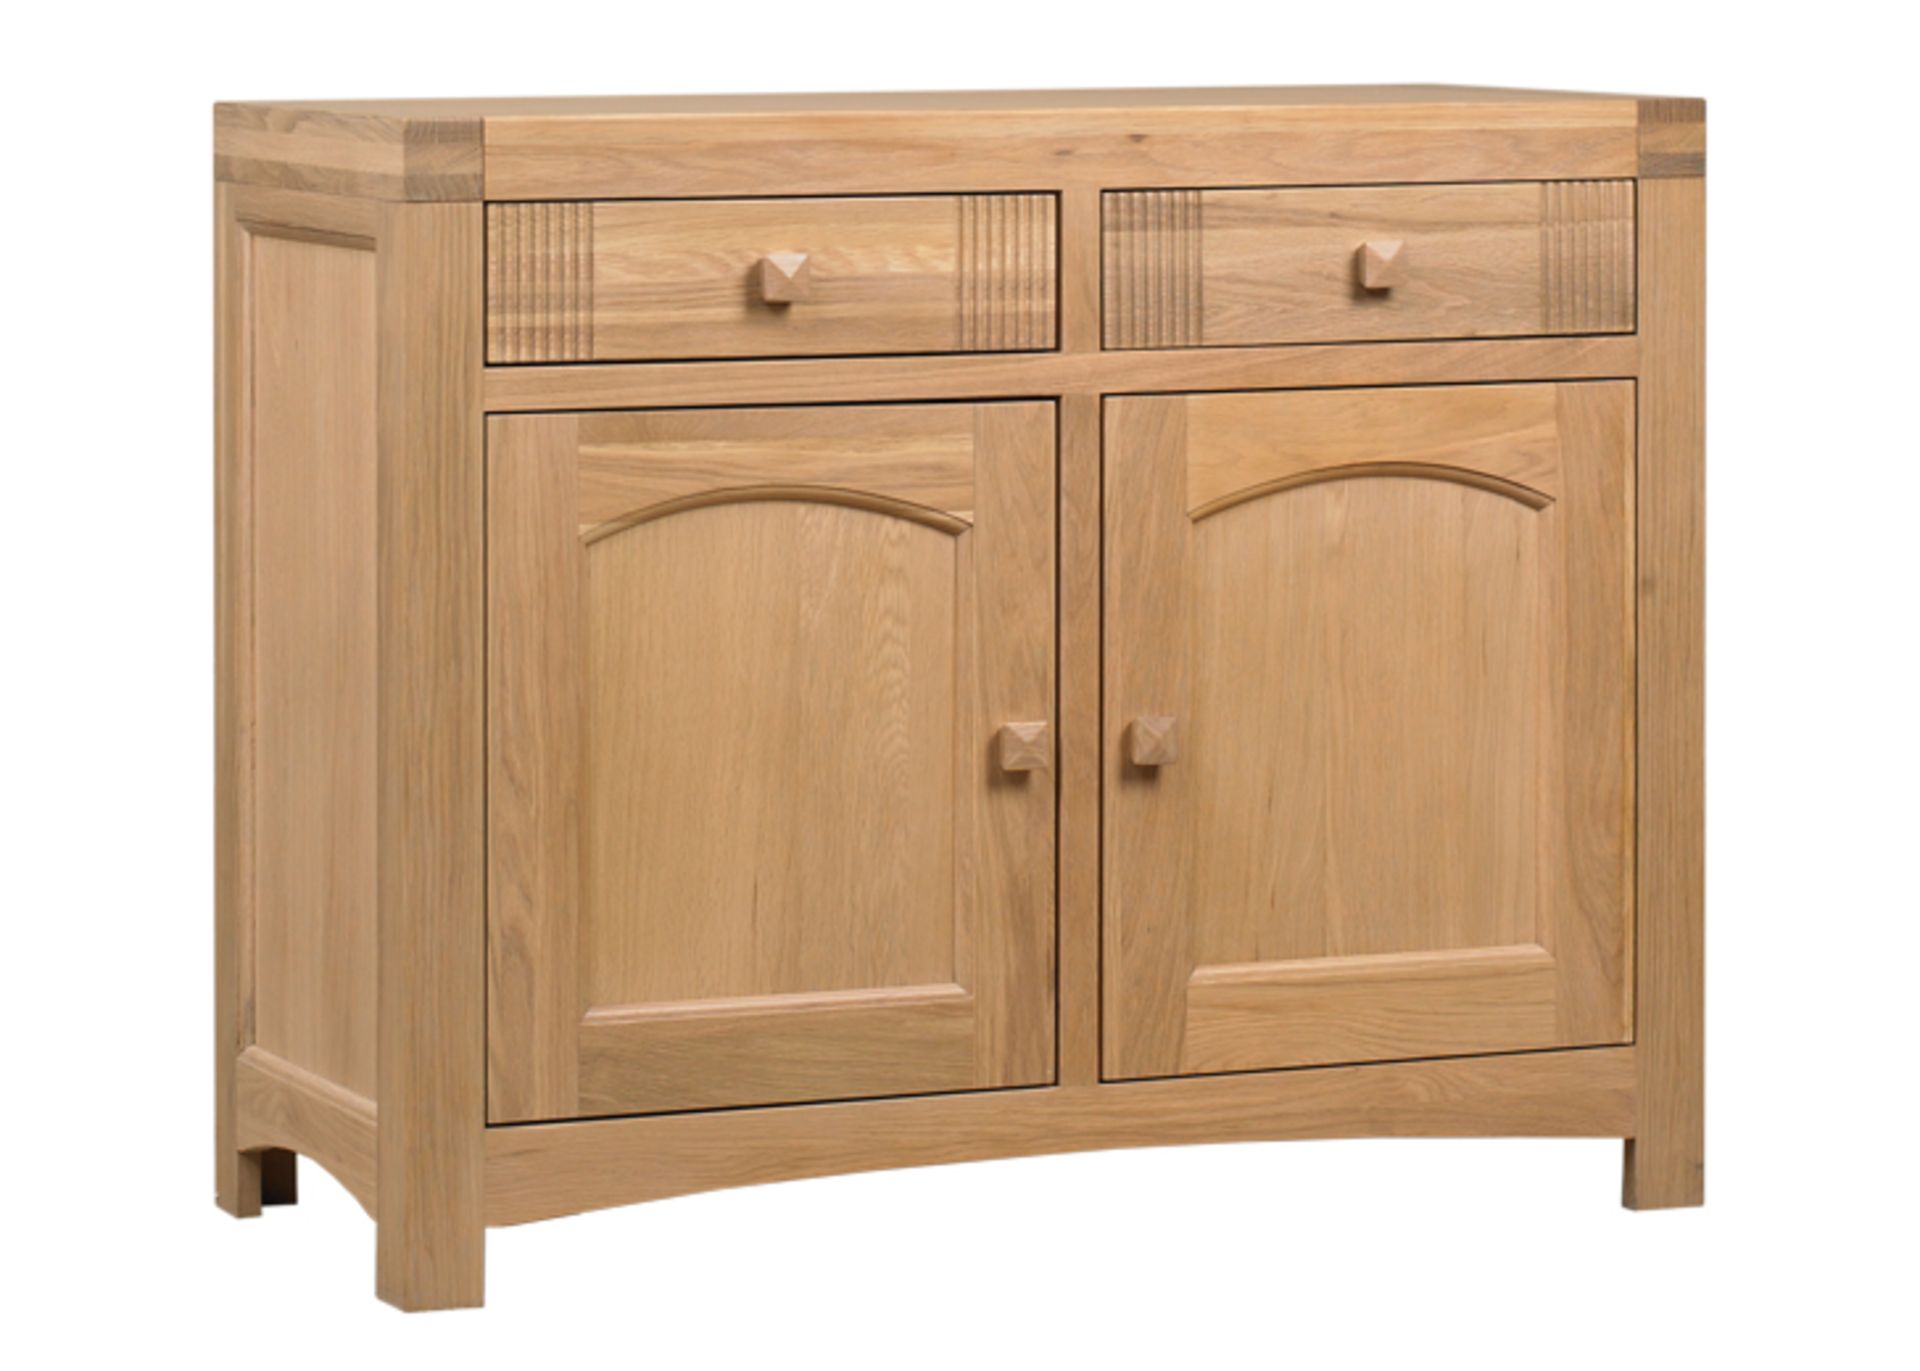 1 x Mark Webster Buckingham Small Sideboad  - Two Door/Two Drawer - White Wash Oak With a Timeless